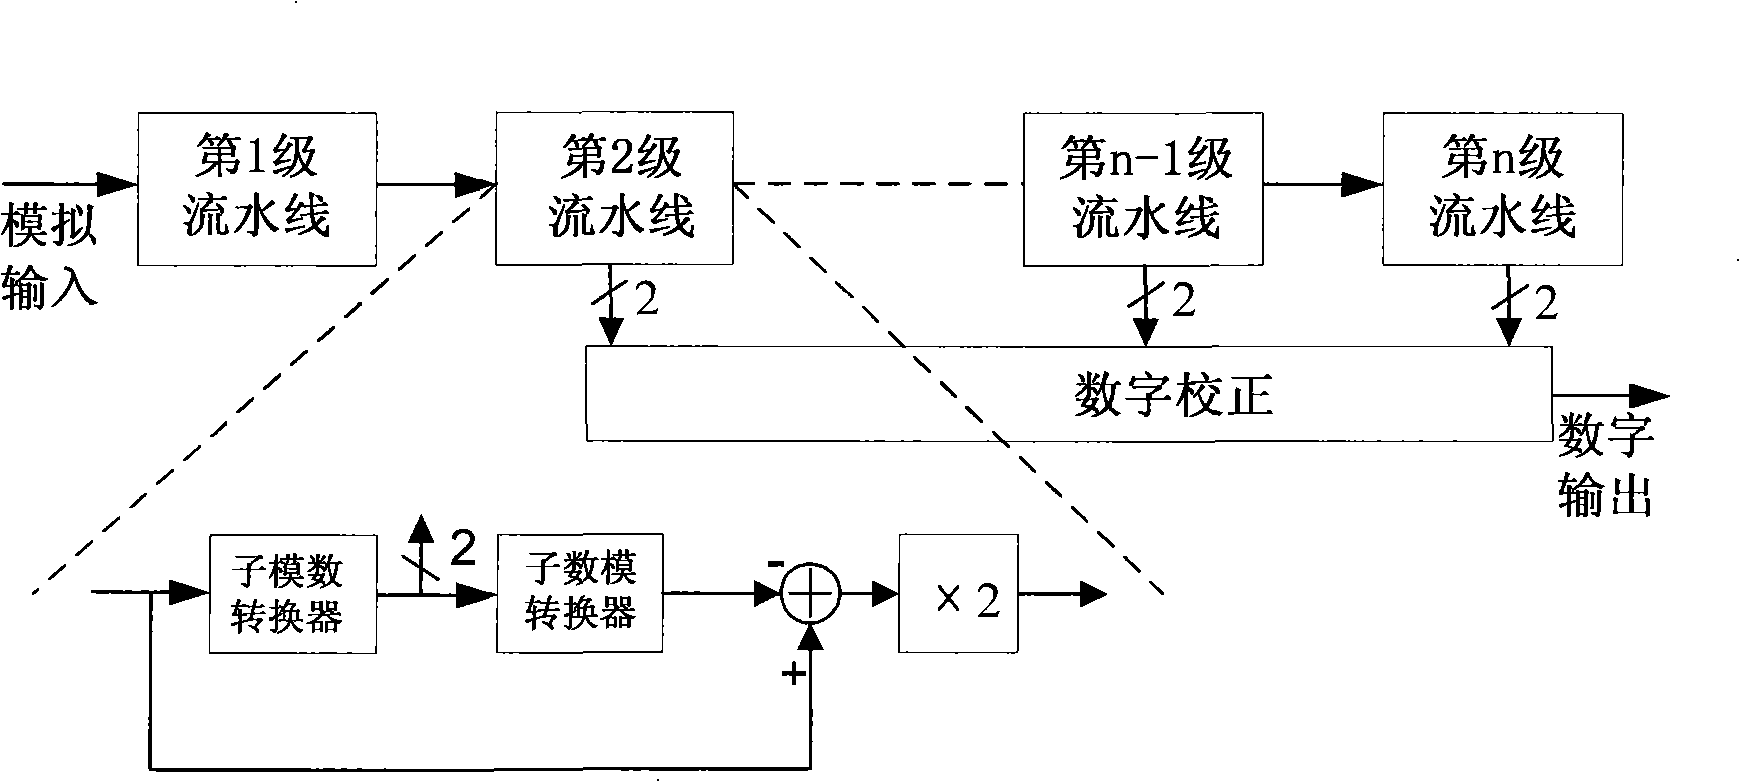 Low-power consumption assembly line a/d converter by sharing operation amplifier